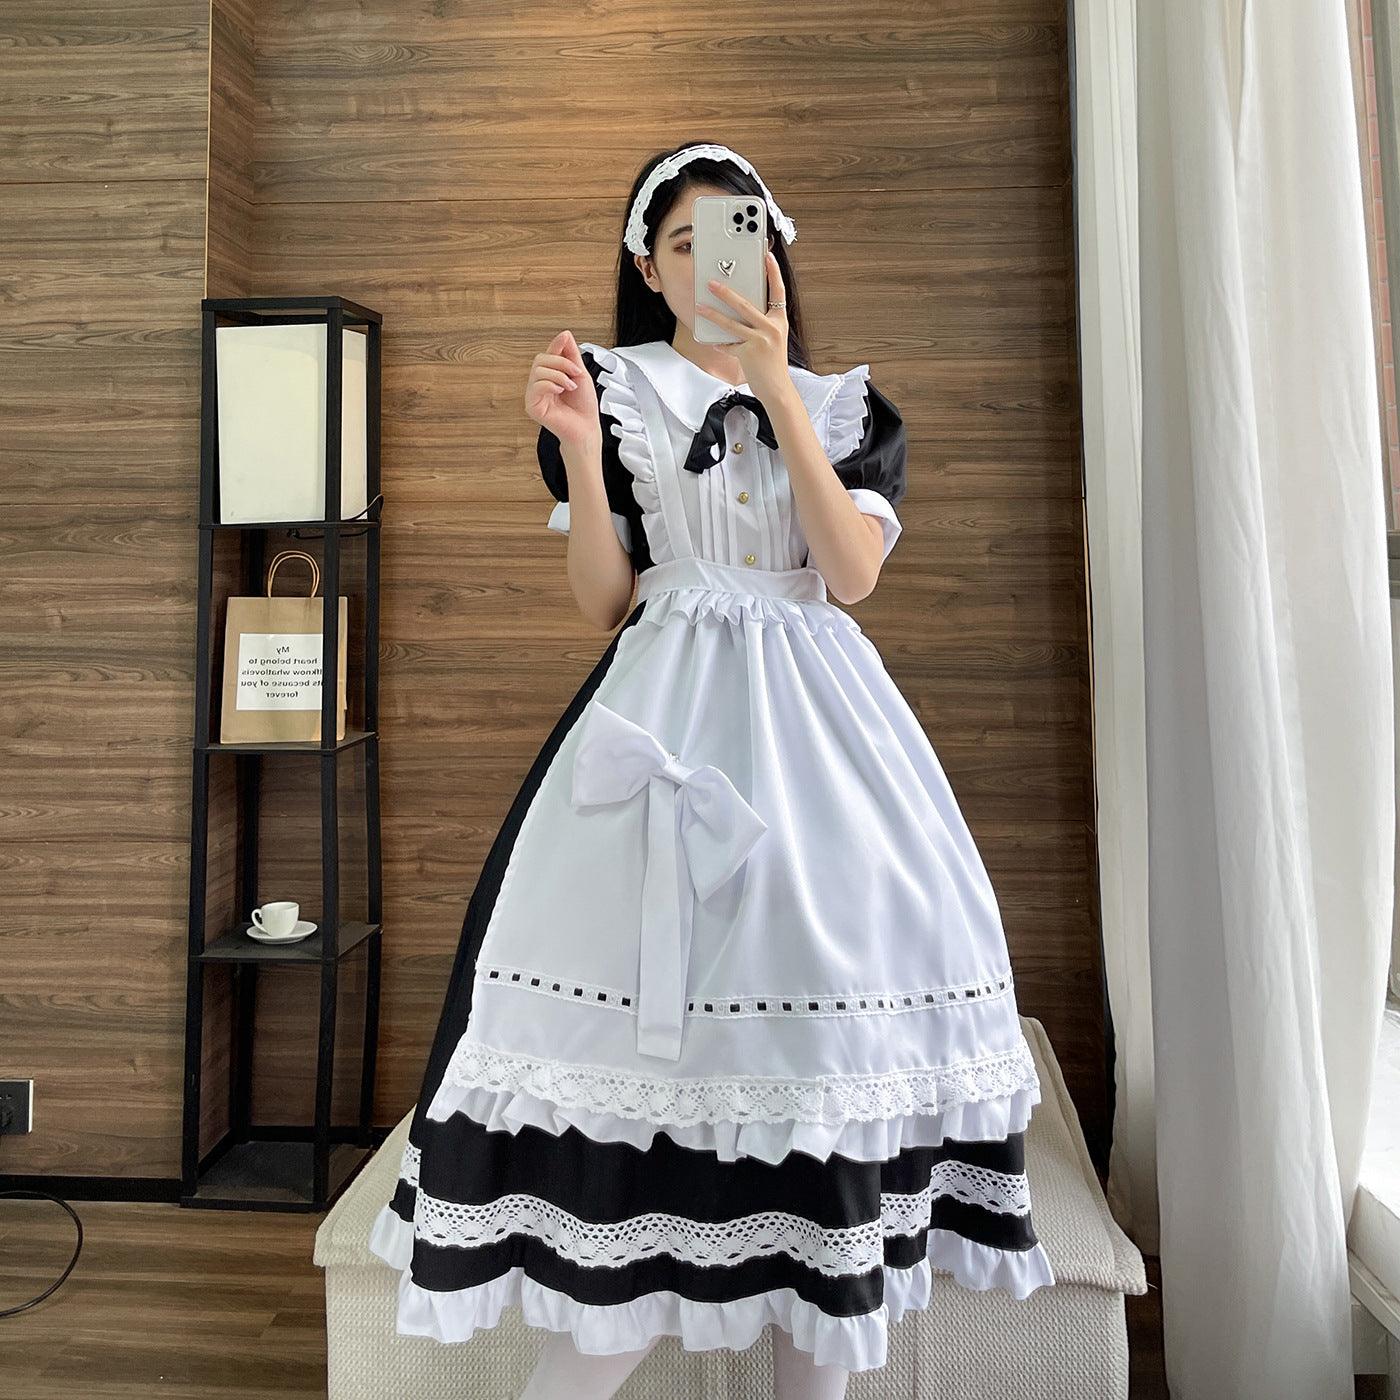 Traditional Short Sleeves Maid Outfit Lolita Dress Crossdresser CD Fancy Cosplay Costume